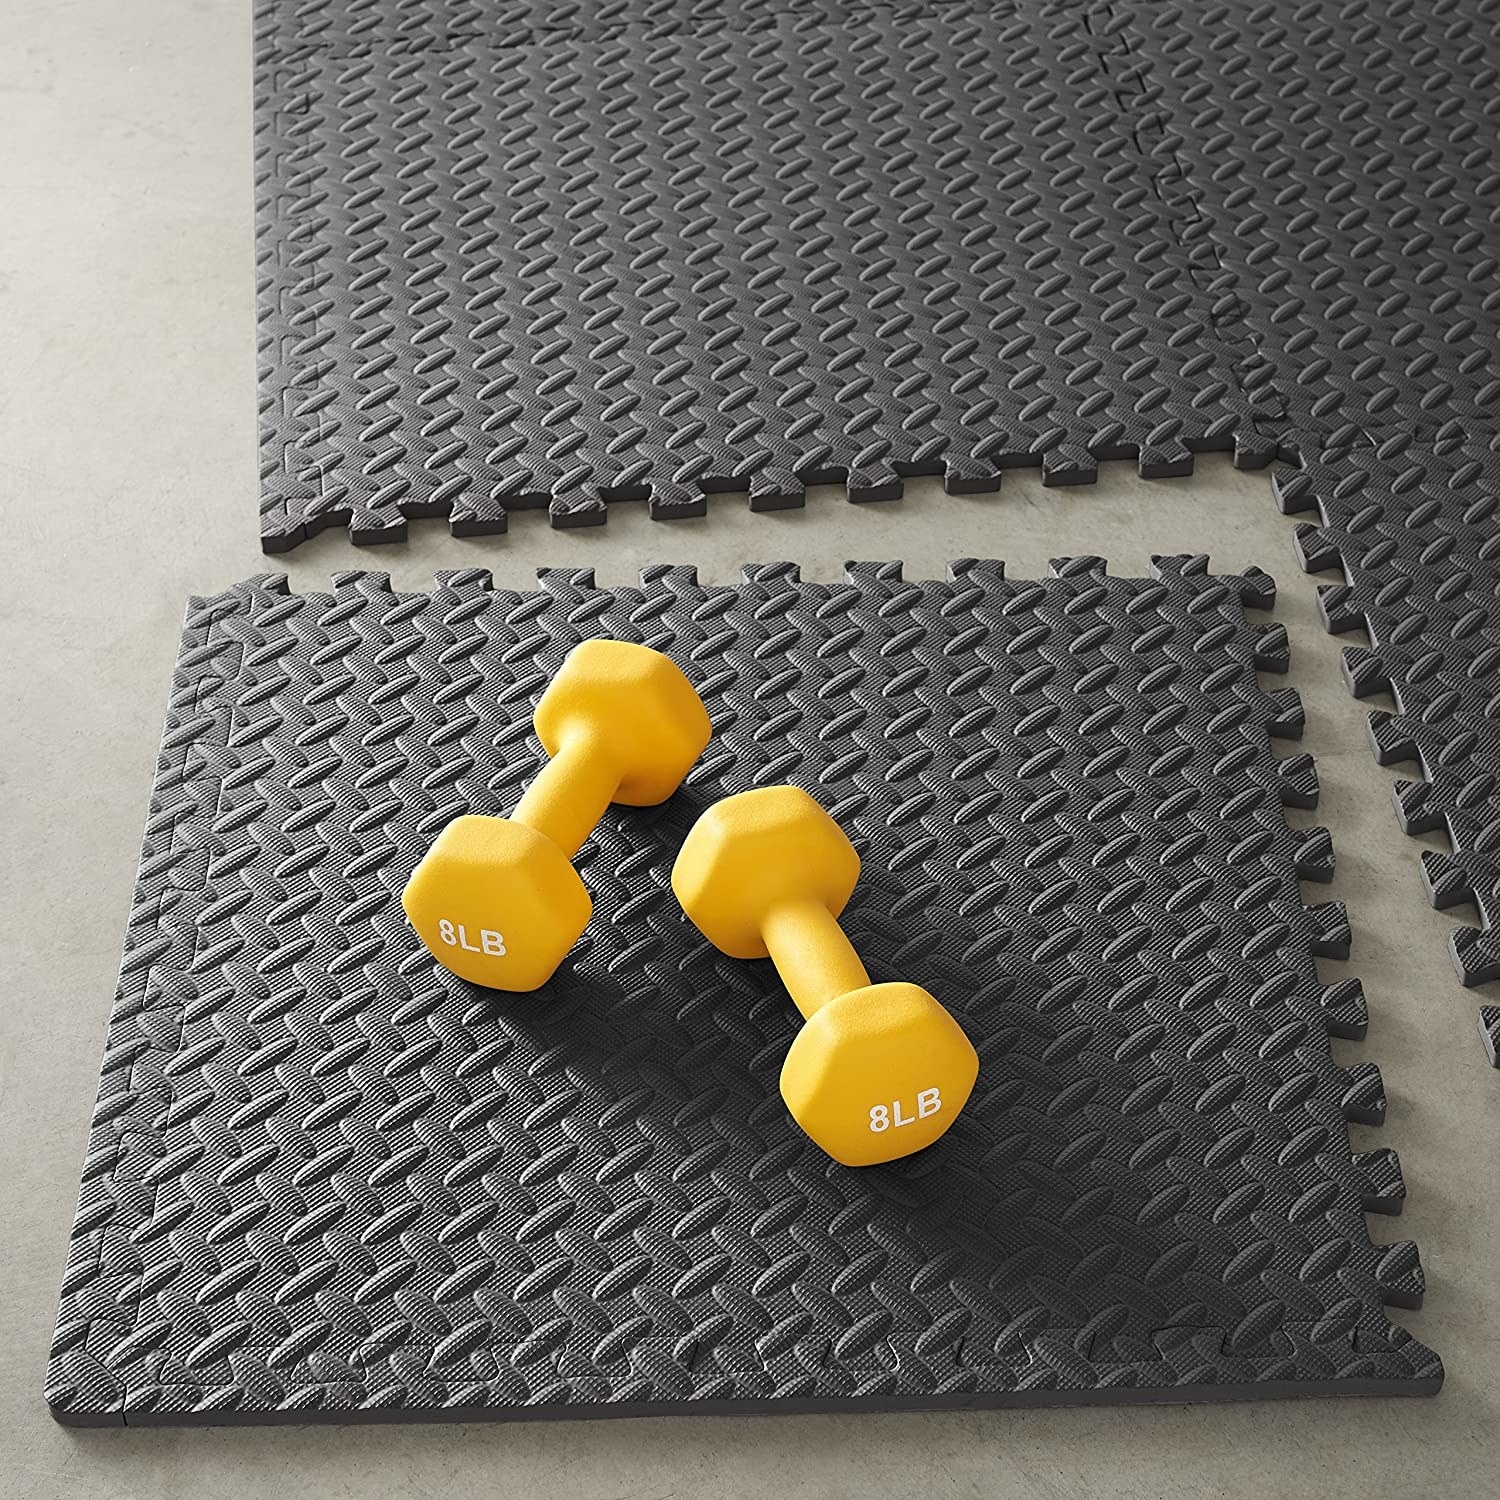 Interlocking foam tiles with a pair of 8 pound weights sitting on one